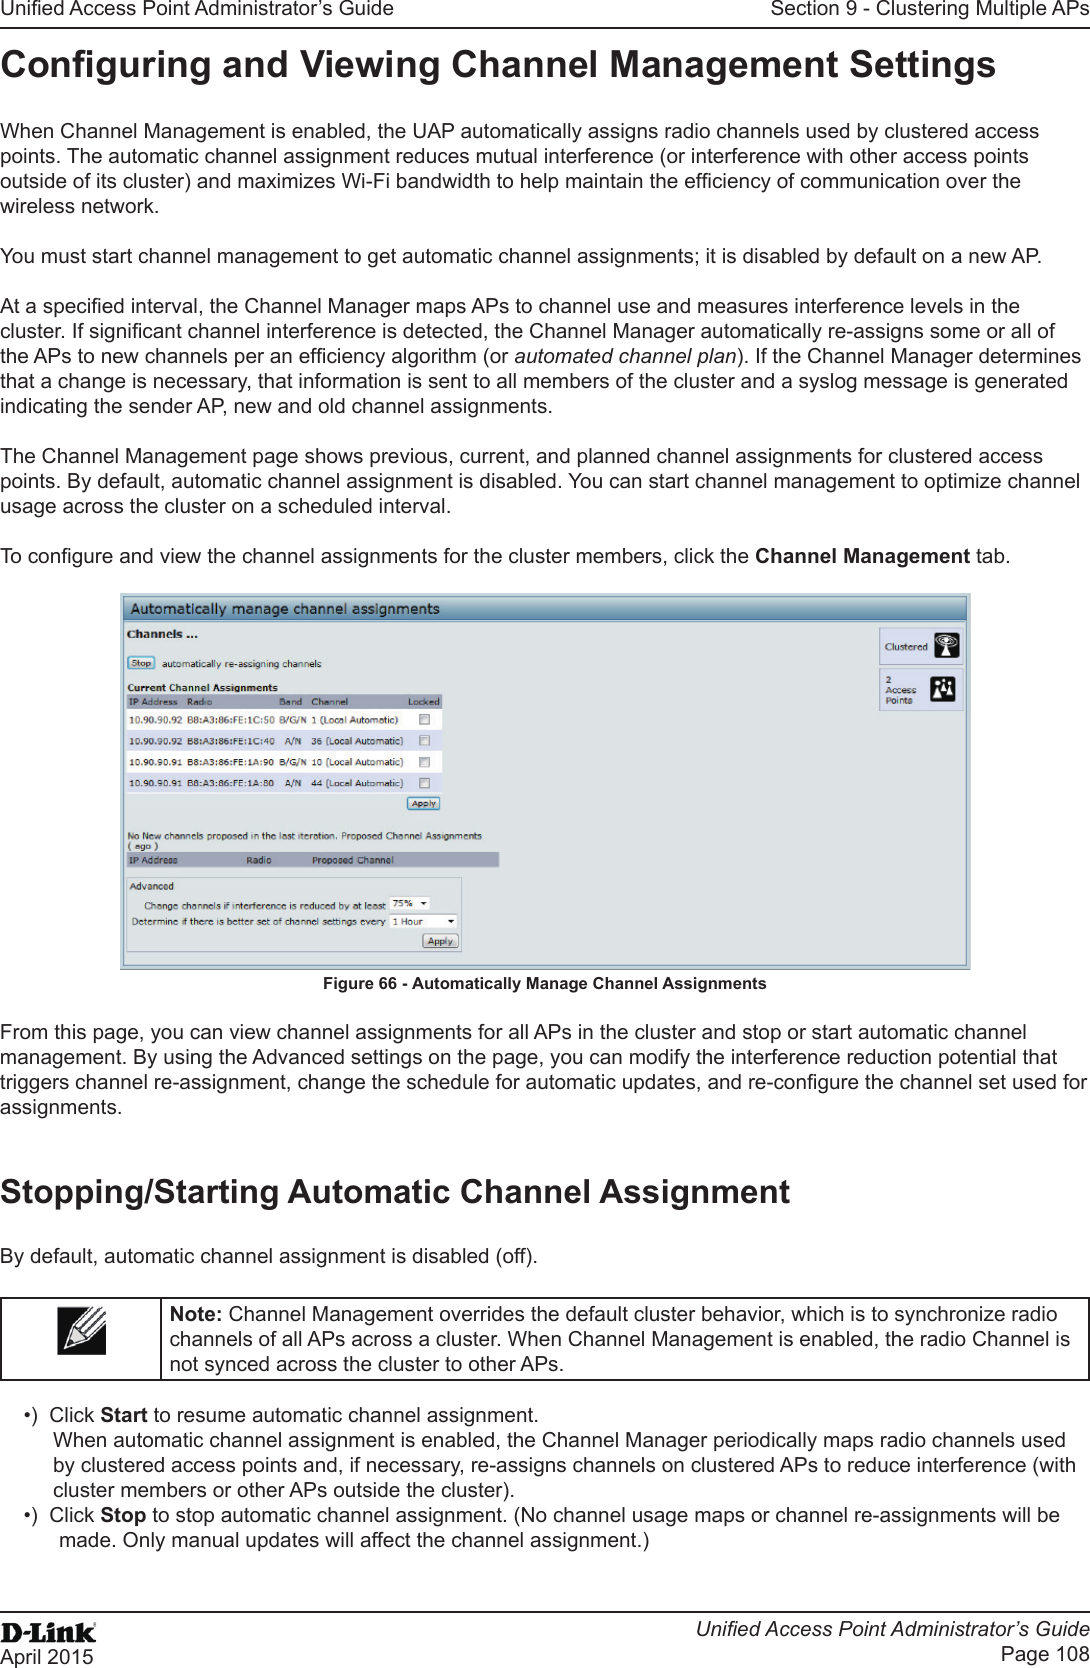 Unied Access Point Administrator’s GuideUnied Access Point Administrator’s GuidePage 108April 2015Section 9 - Clustering Multiple APsConguring and Viewing Channel Management SettingsWhen Channel Management is enabled, the UAP automatically assigns radio channels used by clustered access points. The automatic channel assignment reduces mutual interference (or interference with other access points outside of its cluster) and maximizes Wi-Fi bandwidth to help maintain the efciency of communication over the wireless network.You must start channel management to get automatic channel assignments; it is disabled by default on a new AP.At a specied interval, the Channel Manager maps APs to channel use and measures interference levels in the cluster. If signicant channel interference is detected, the Channel Manager automatically re-assigns some or all of the APs to new channels per an efciency algorithm (or automated channel plan). If the Channel Manager determines that a change is necessary, that information is sent to all members of the cluster and a syslog message is generated indicating the sender AP, new and old channel assignments.The Channel Management page shows previous, current, and planned channel assignments for clustered access points. By default, automatic channel assignment is disabled. You can start channel management to optimize channel usage across the cluster on a scheduled interval.To congure and view the channel assignments for the cluster members, click the Channel Management tab.Figure 66 - Automatically Manage Channel AssignmentsFrom this page, you can view channel assignments for all APs in the cluster and stop or start automatic channel management. By using the Advanced settings on the page, you can modify the interference reduction potential that triggers channel re-assignment, change the schedule for automatic updates, and re-congure the channel set used for assignments.Stopping/Starting Automatic Channel AssignmentBy default, automatic channel assignment is disabled (off).Note: Channel Management overrides the default cluster behavior, which is to synchronize radio channels of all APs across a cluster. When Channel Management is enabled, the radio Channel is not synced across the cluster to other APs. •)  Click Start to resume automatic channel assignment.When automatic channel assignment is enabled, the Channel Manager periodically maps radio channels used by clustered access points and, if necessary, re-assigns channels on clustered APs to reduce interference (with cluster members or other APs outside the cluster).•)  Click Stop to stop automatic channel assignment. (No channel usage maps or channel re-assignments will be made. Only manual updates will affect the channel assignment.)